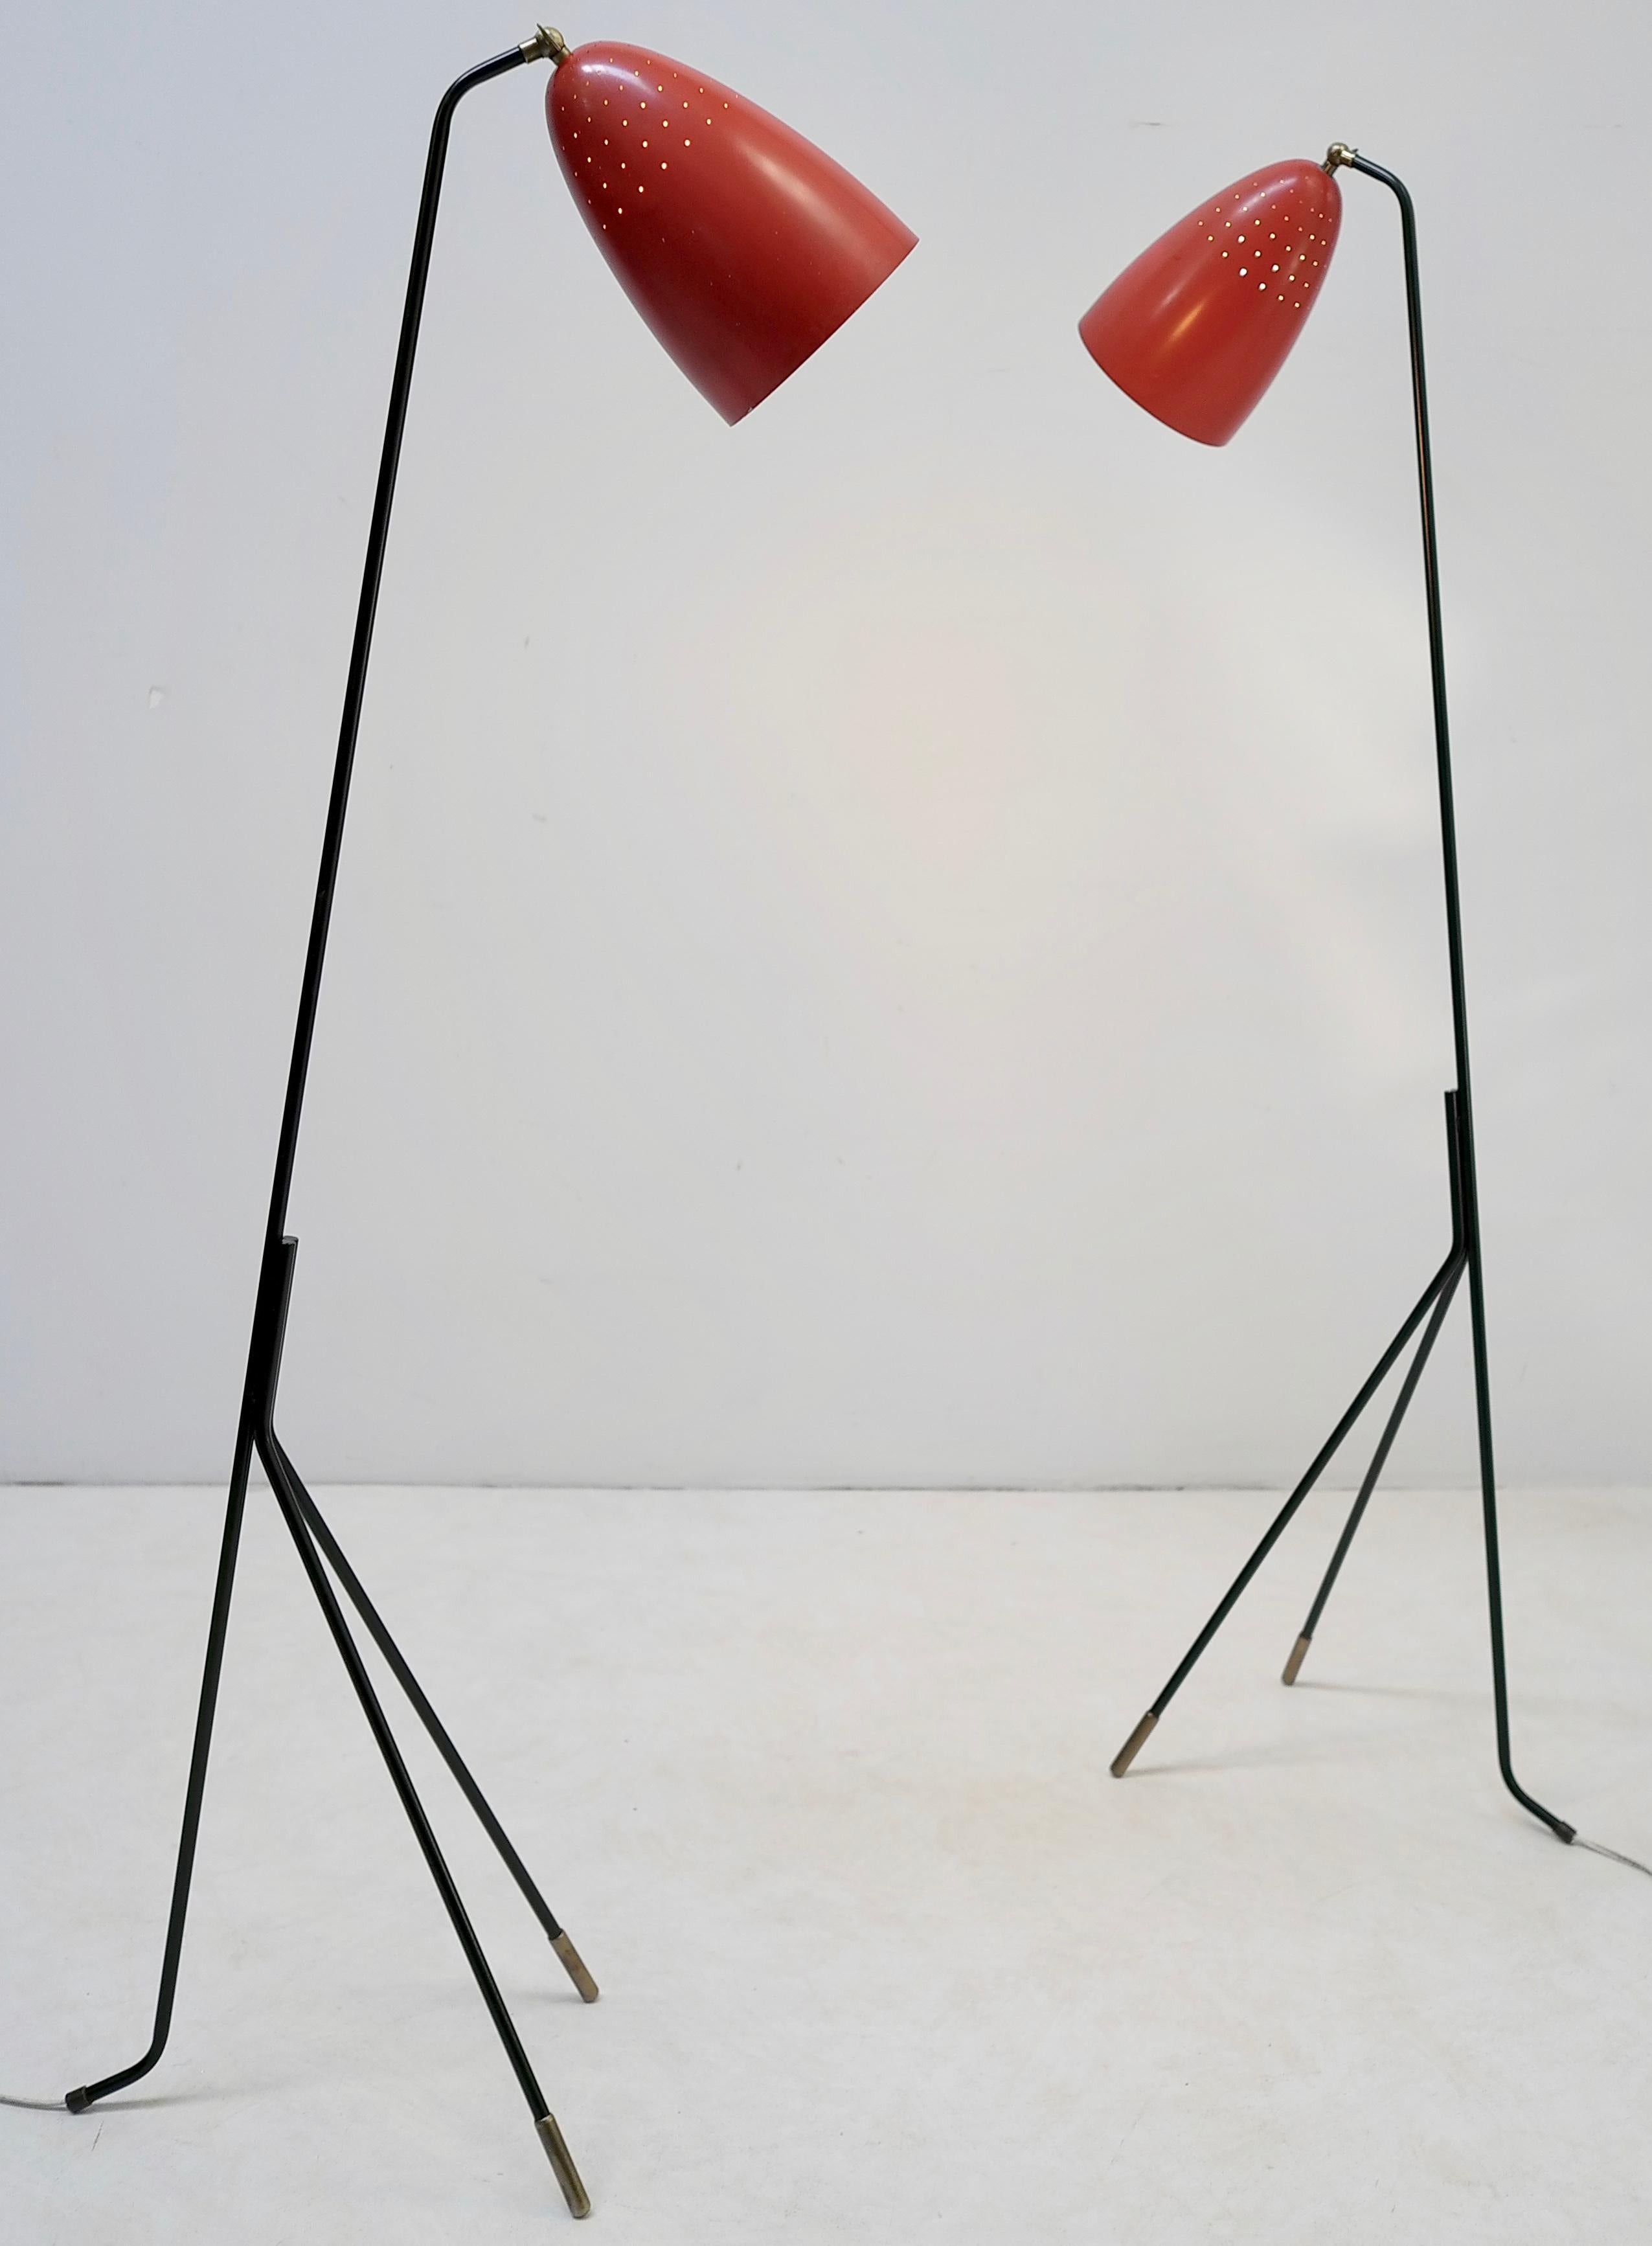 Pair of Red Danish Grasshopper Floor Lamps by Svend Aage Holm Sørensen For Sale 2